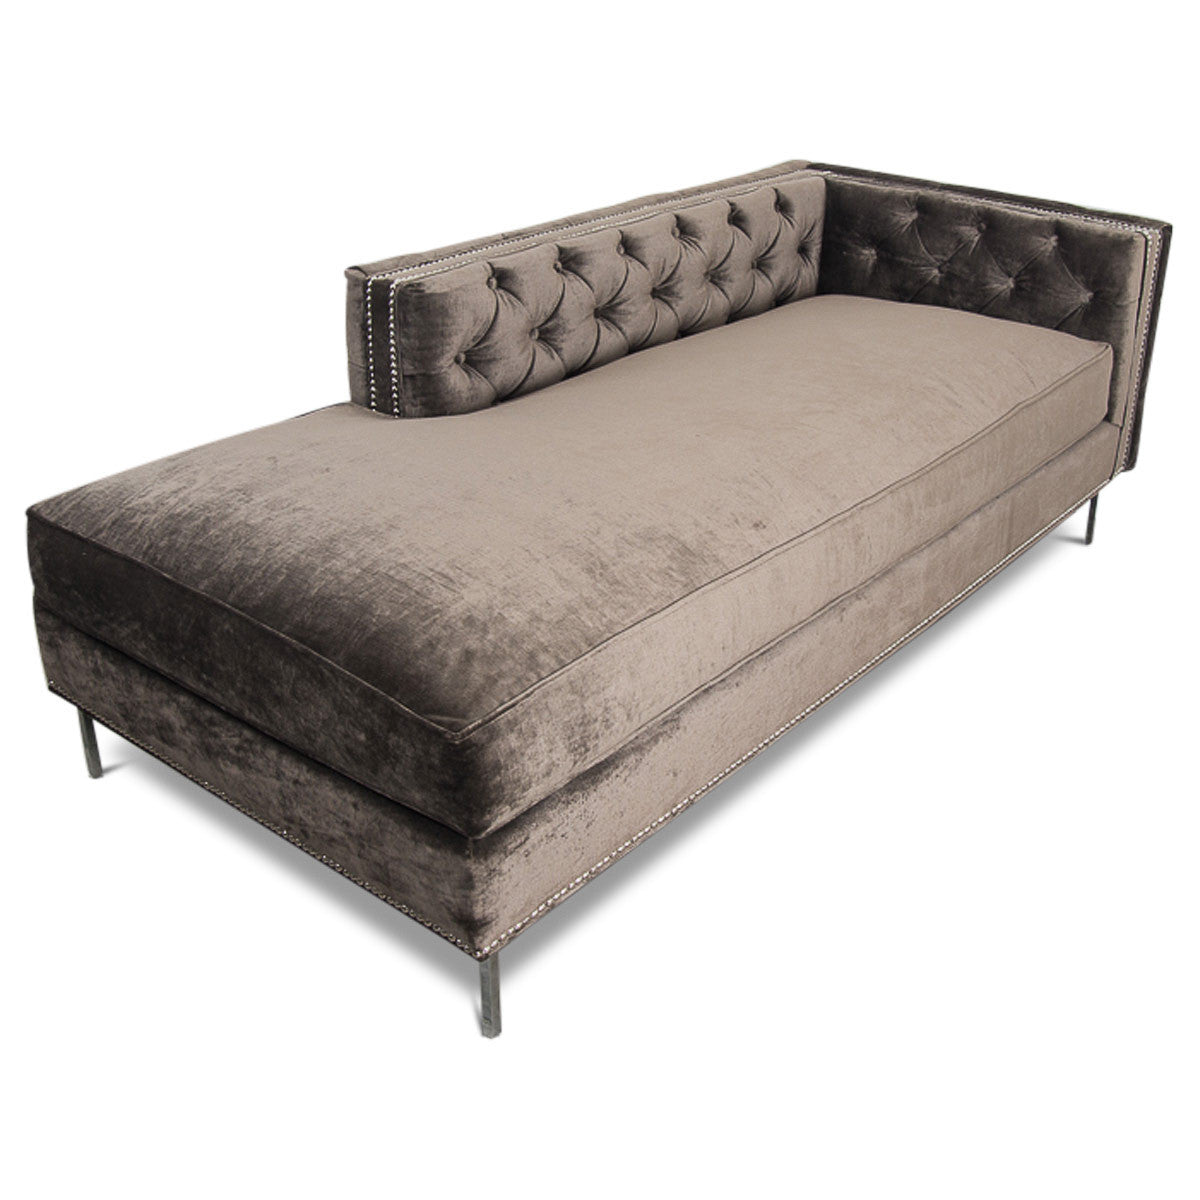 Hollywood Inside-Out Chaise in Charcoal Velvet - ModShop1.com